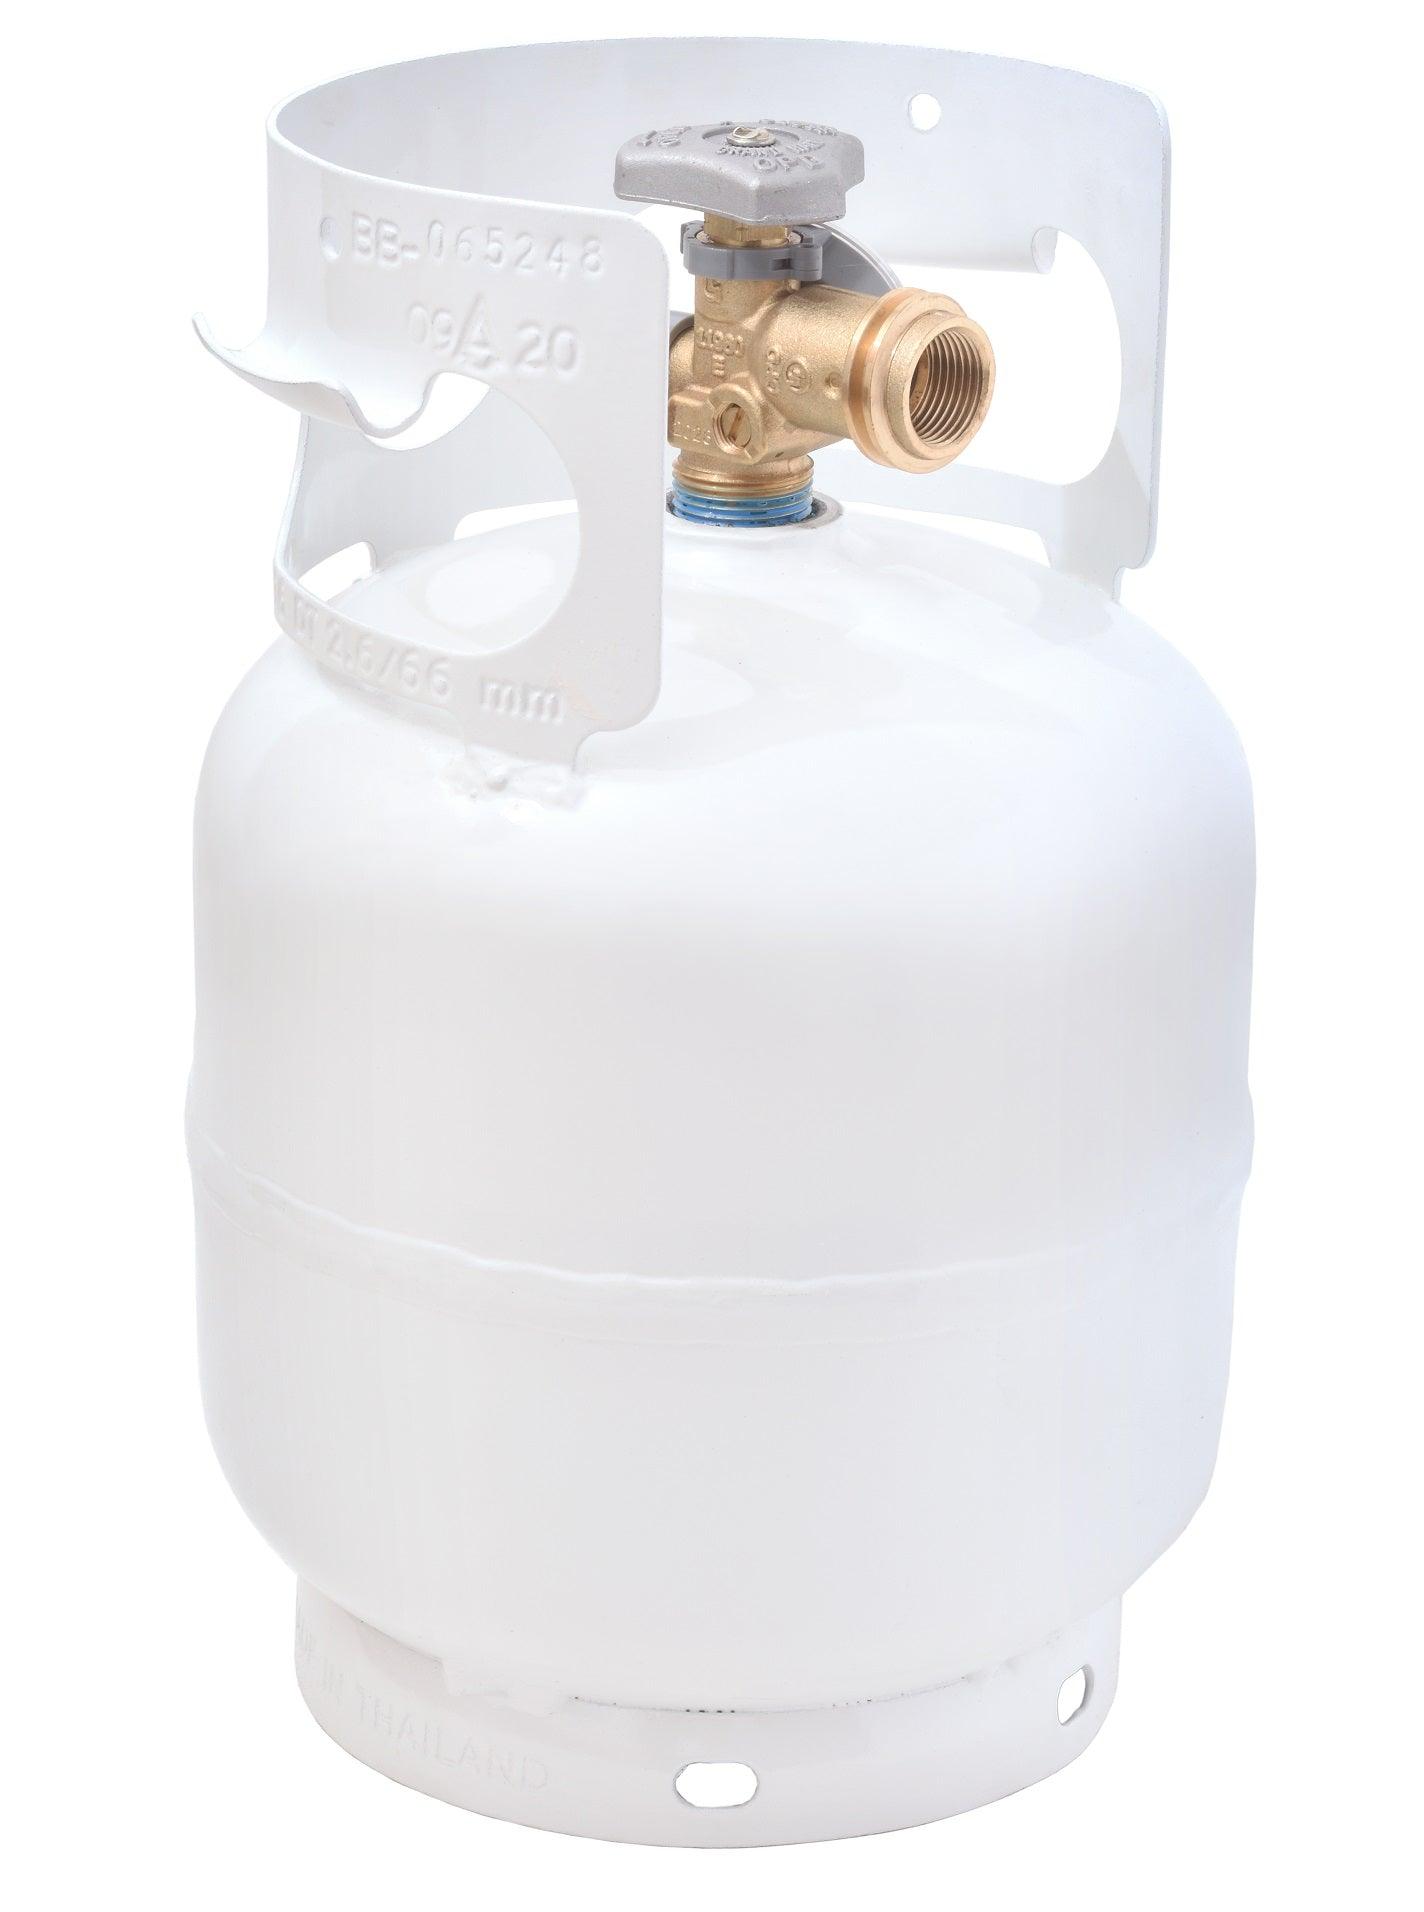 Flame King YSN03 3lb Steel Propane Tank Cylinder with Gauge and OPD Valves  for Grills and BBQs, Camping, Fishing, & Outdoor Activities, White